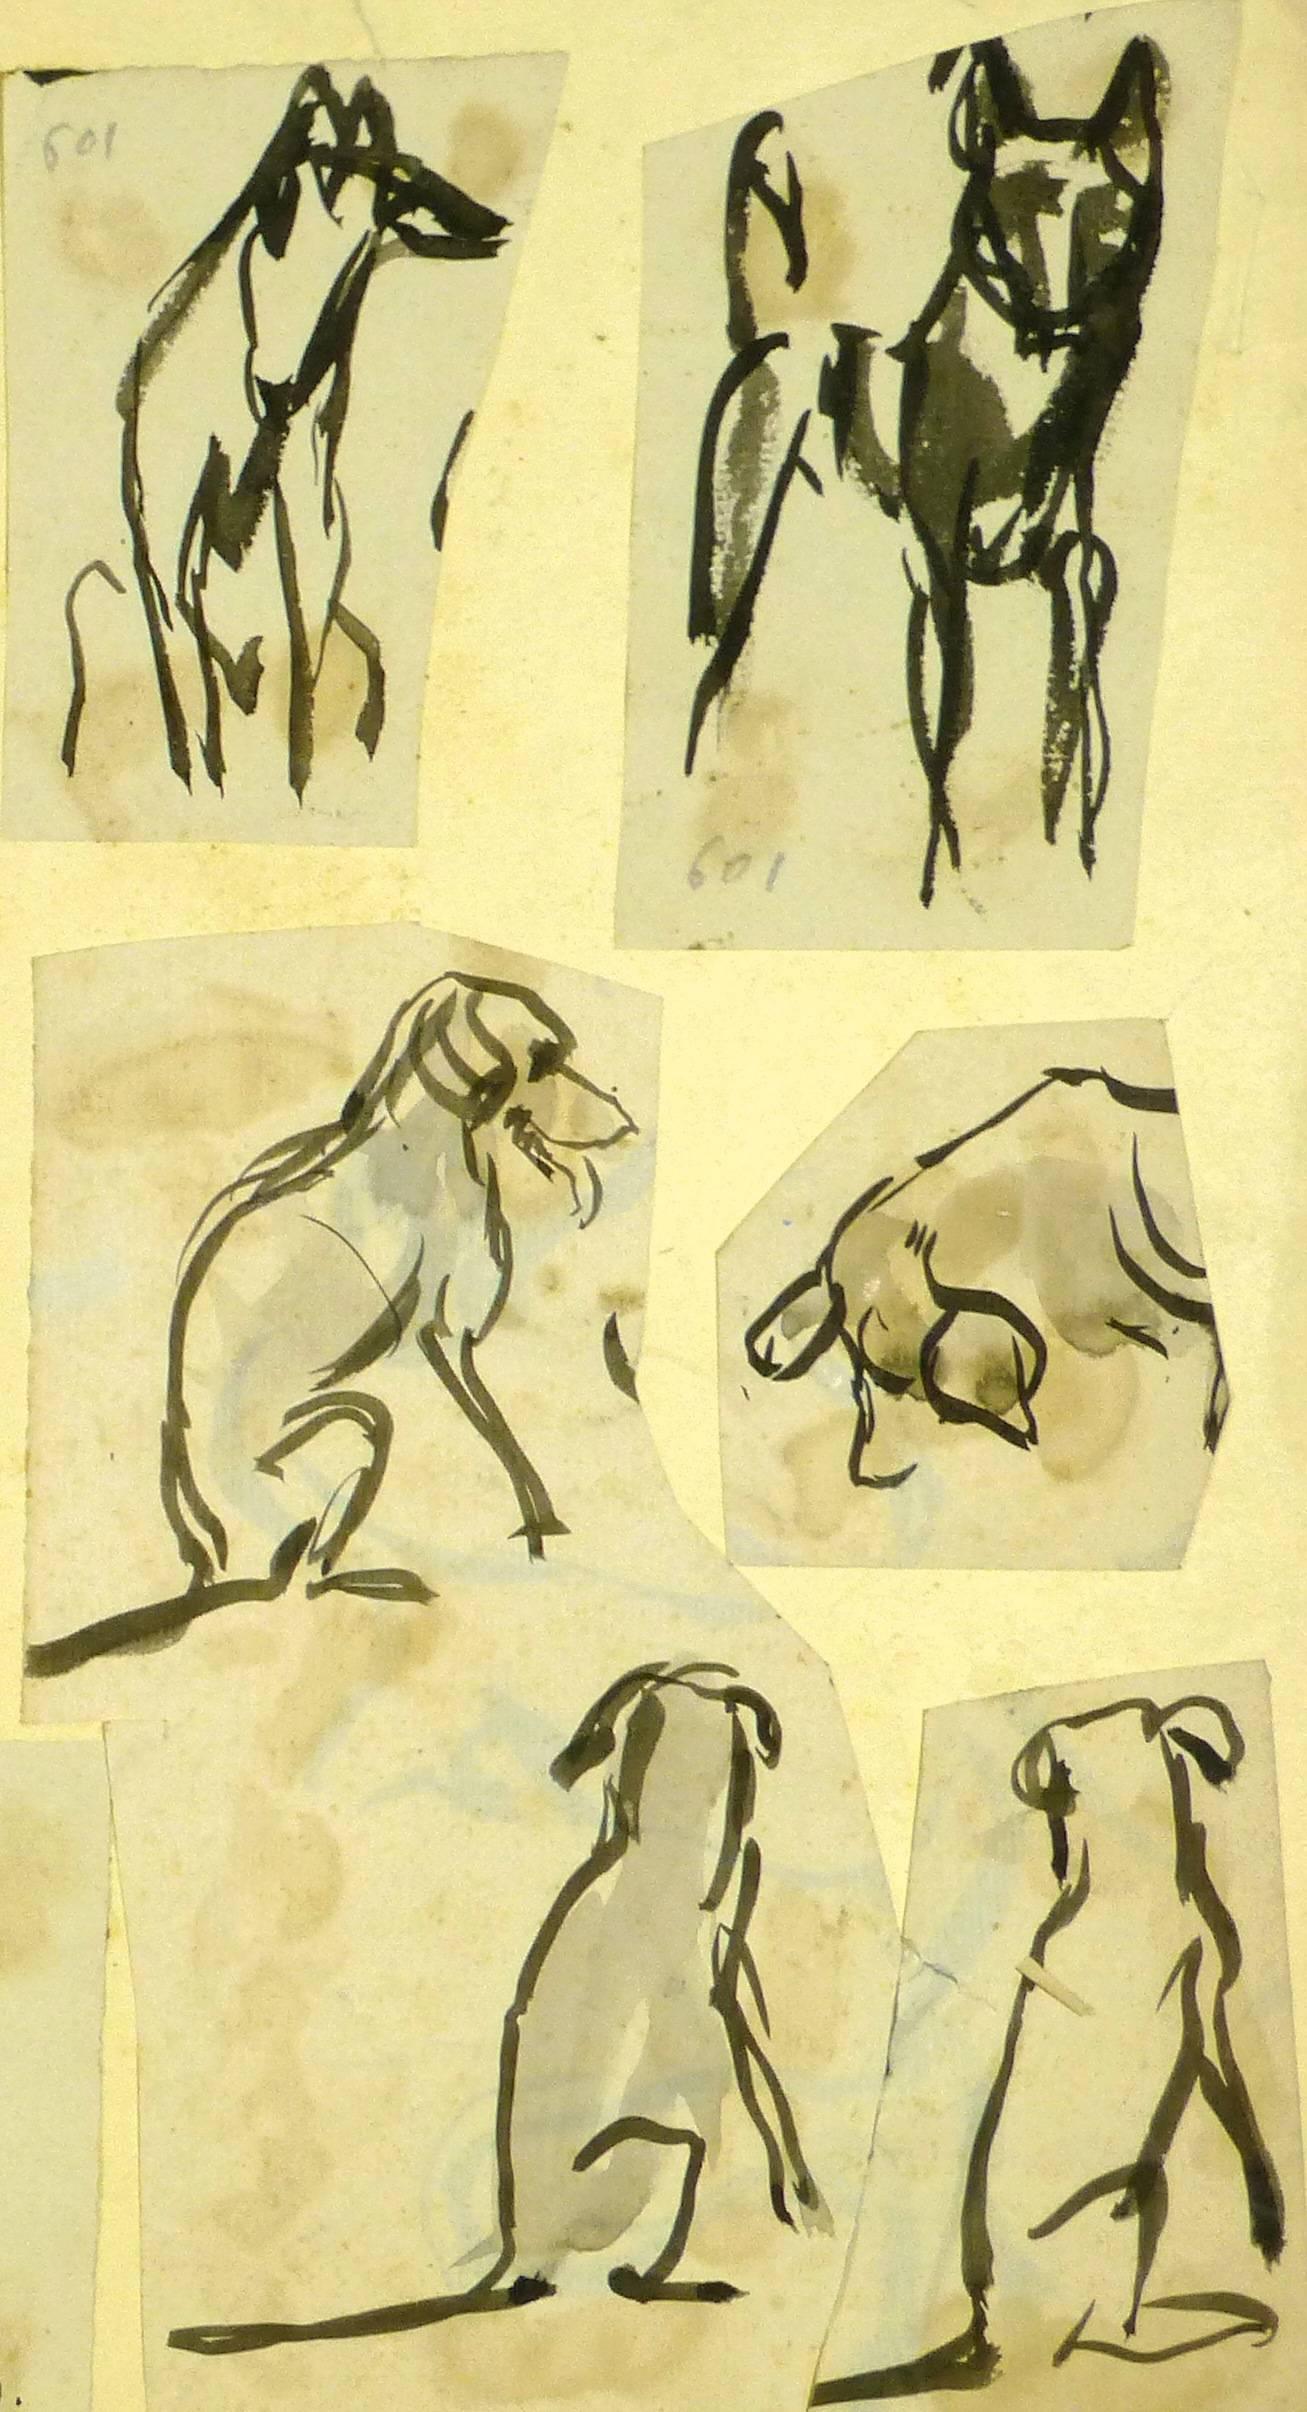 French ink wash drawings of dogs pasted to paper.  Signatures on individual drawings.

Original artwork on paper displayed on a white mat with a gold border. Archival plastic sleeve and Certificate of Authenticity included. Artwork, 12.25